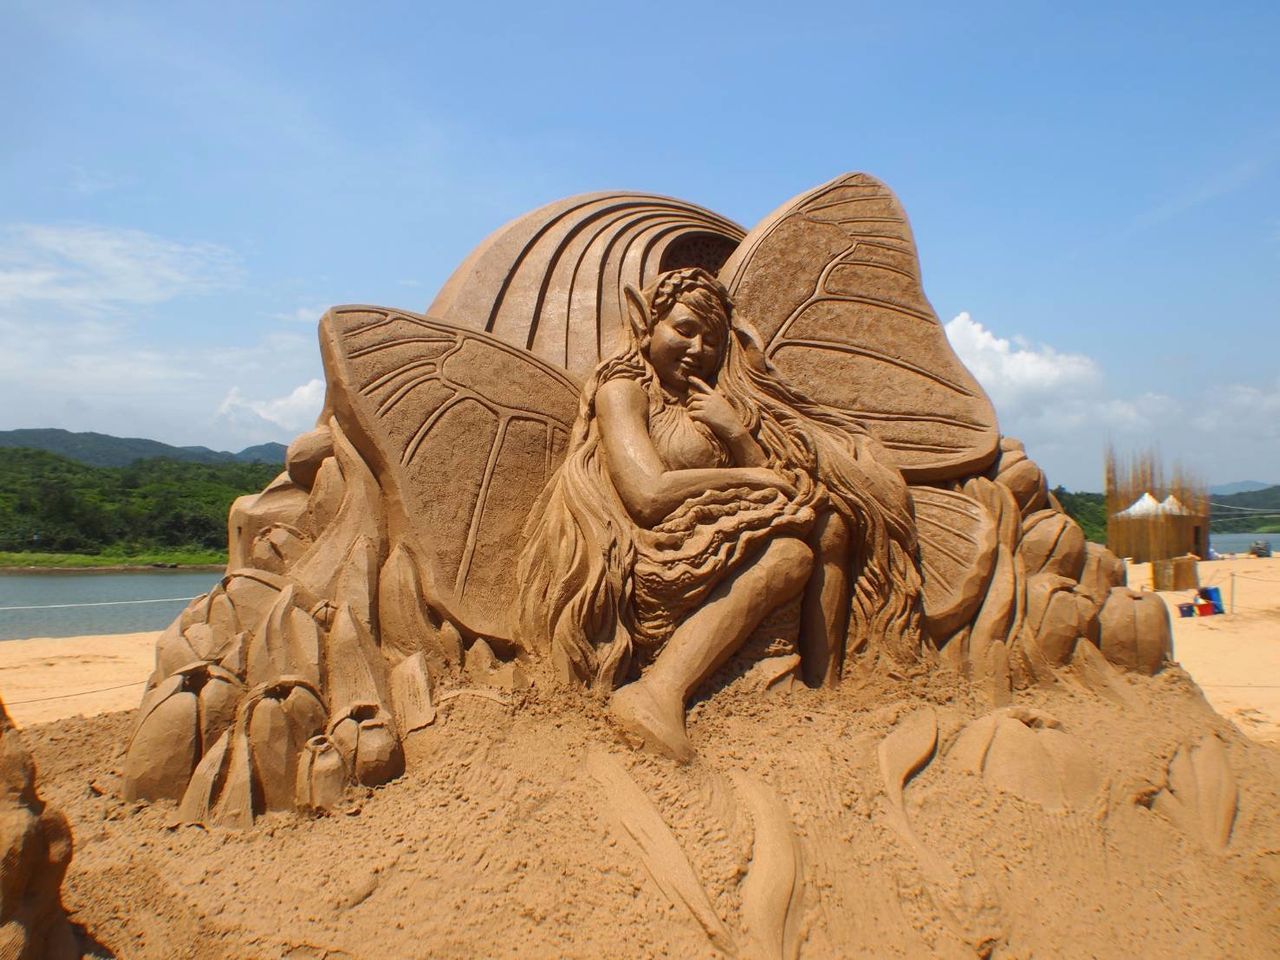 Sandsational: Immerse Yourself in Bulgarias Stunning Sculpture Festival!